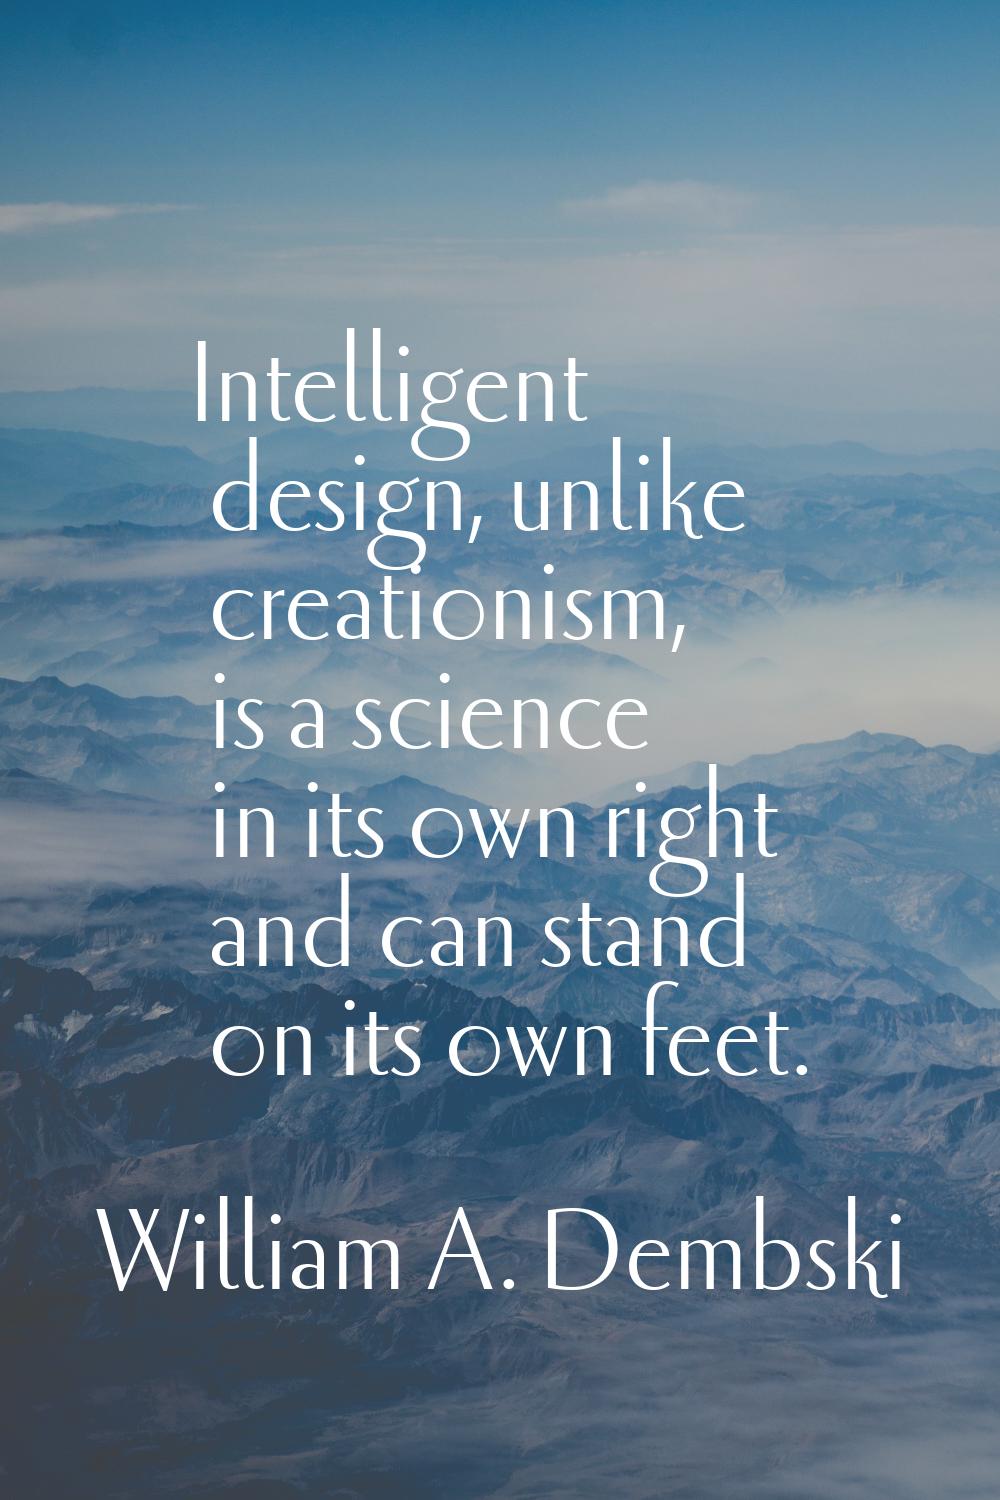 Intelligent design, unlike creationism, is a science in its own right and can stand on its own feet